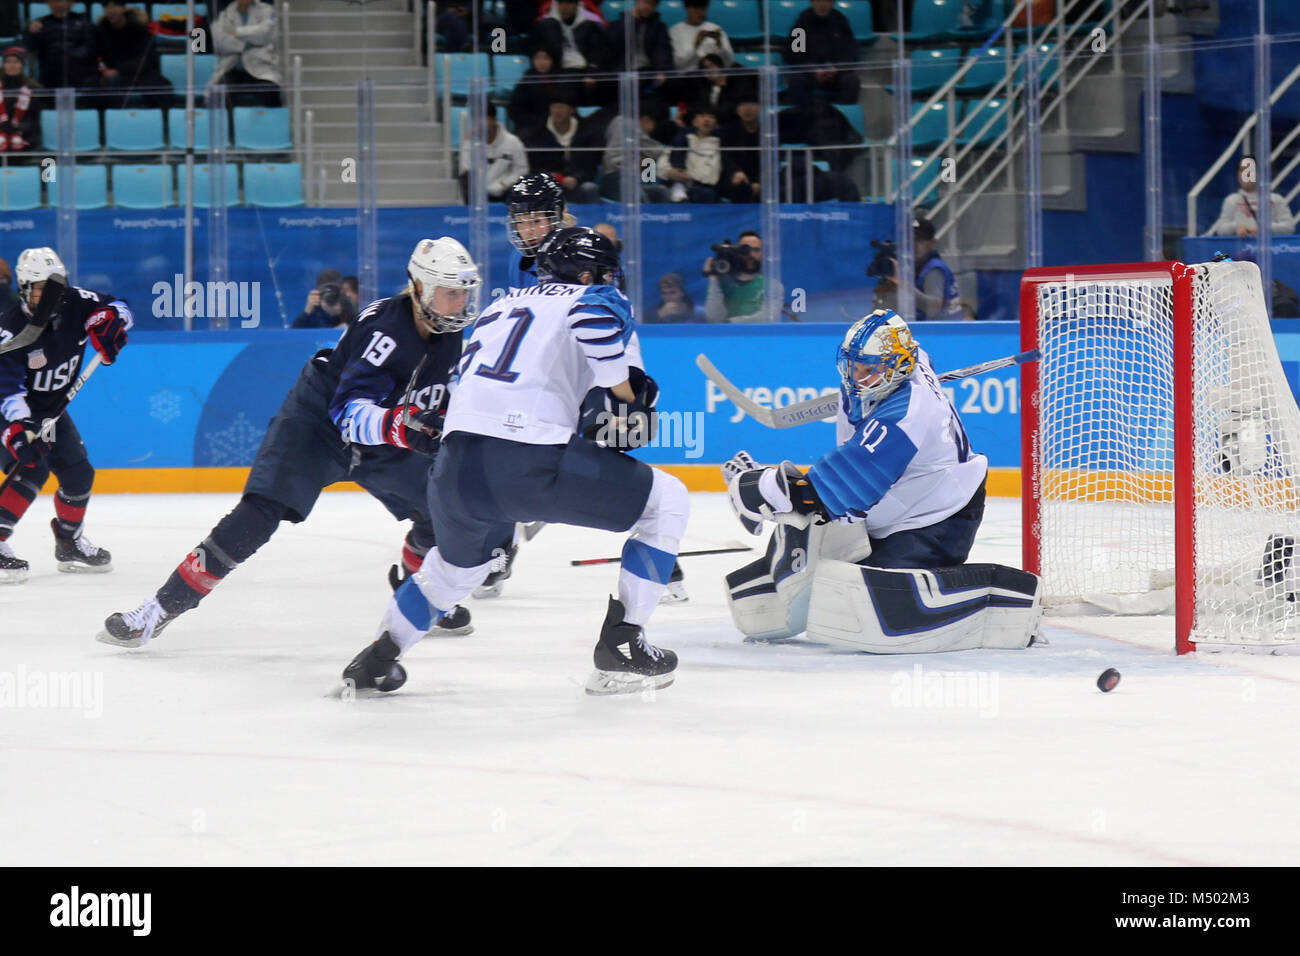 Gangneung, South Korea. 19th Feb, 2018. TANJA NISKANEN of Finland and goalkeeper ROONA RATY defend against GIGI MARVIN of USA during the Ice Hockey: Women's Play-offs Semifinals at Gangneung Hockey Centre during the 2018 Pyeongchang Winter Olympic Games. Credit: Scott Mc Kiernan/ZUMA Wire/Alamy Live News Stock Photo